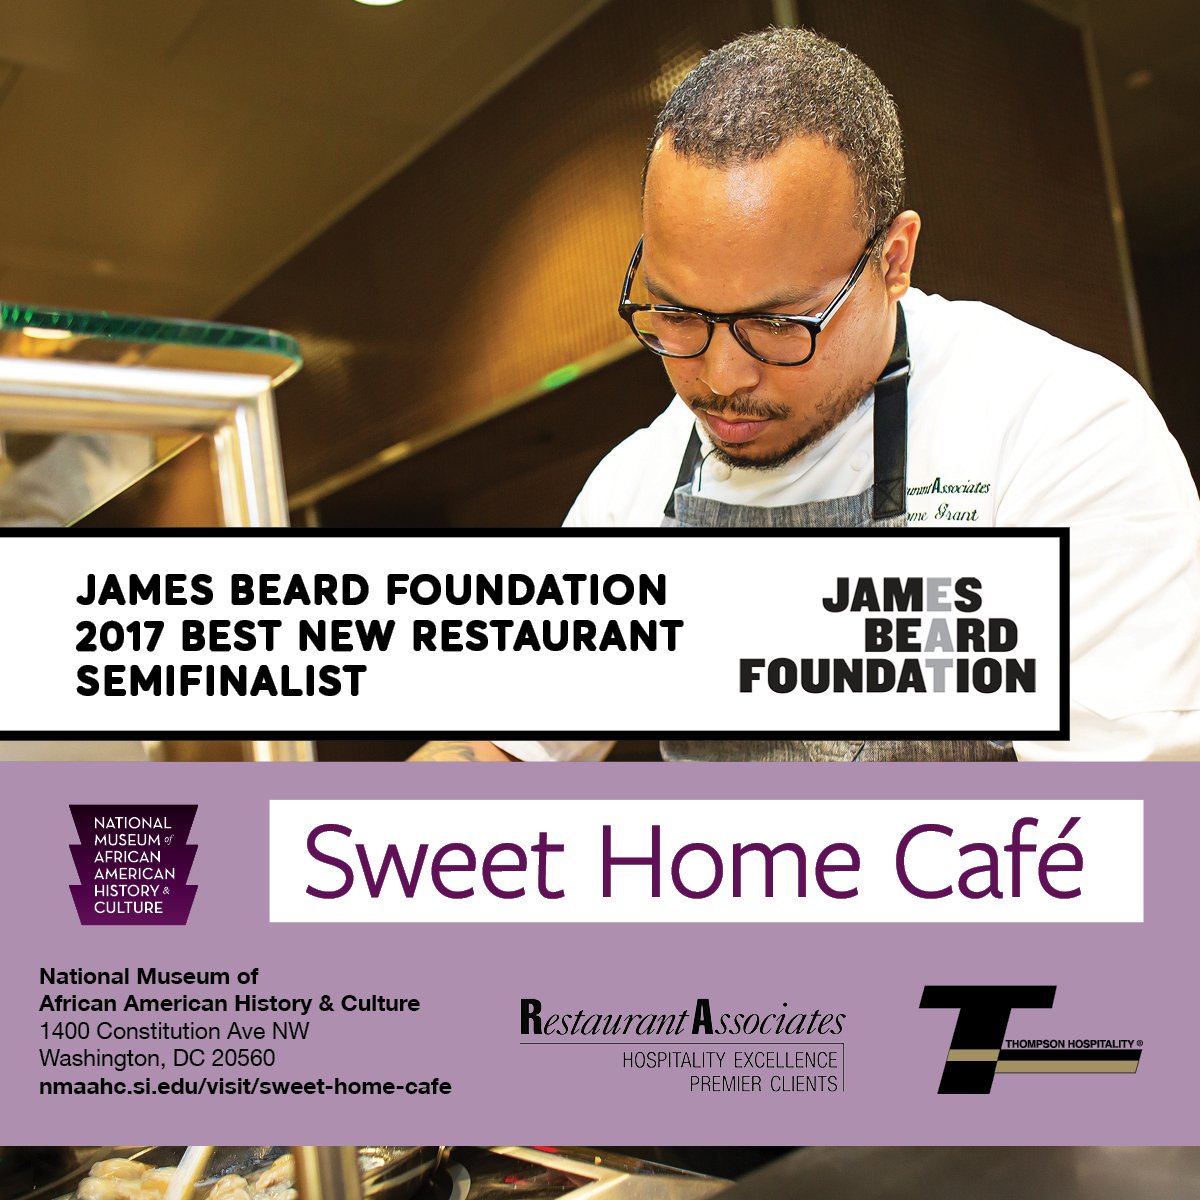 We are so proud of the team at Sweet Home Café @NMAAHC! @beardfoundation #jbfa